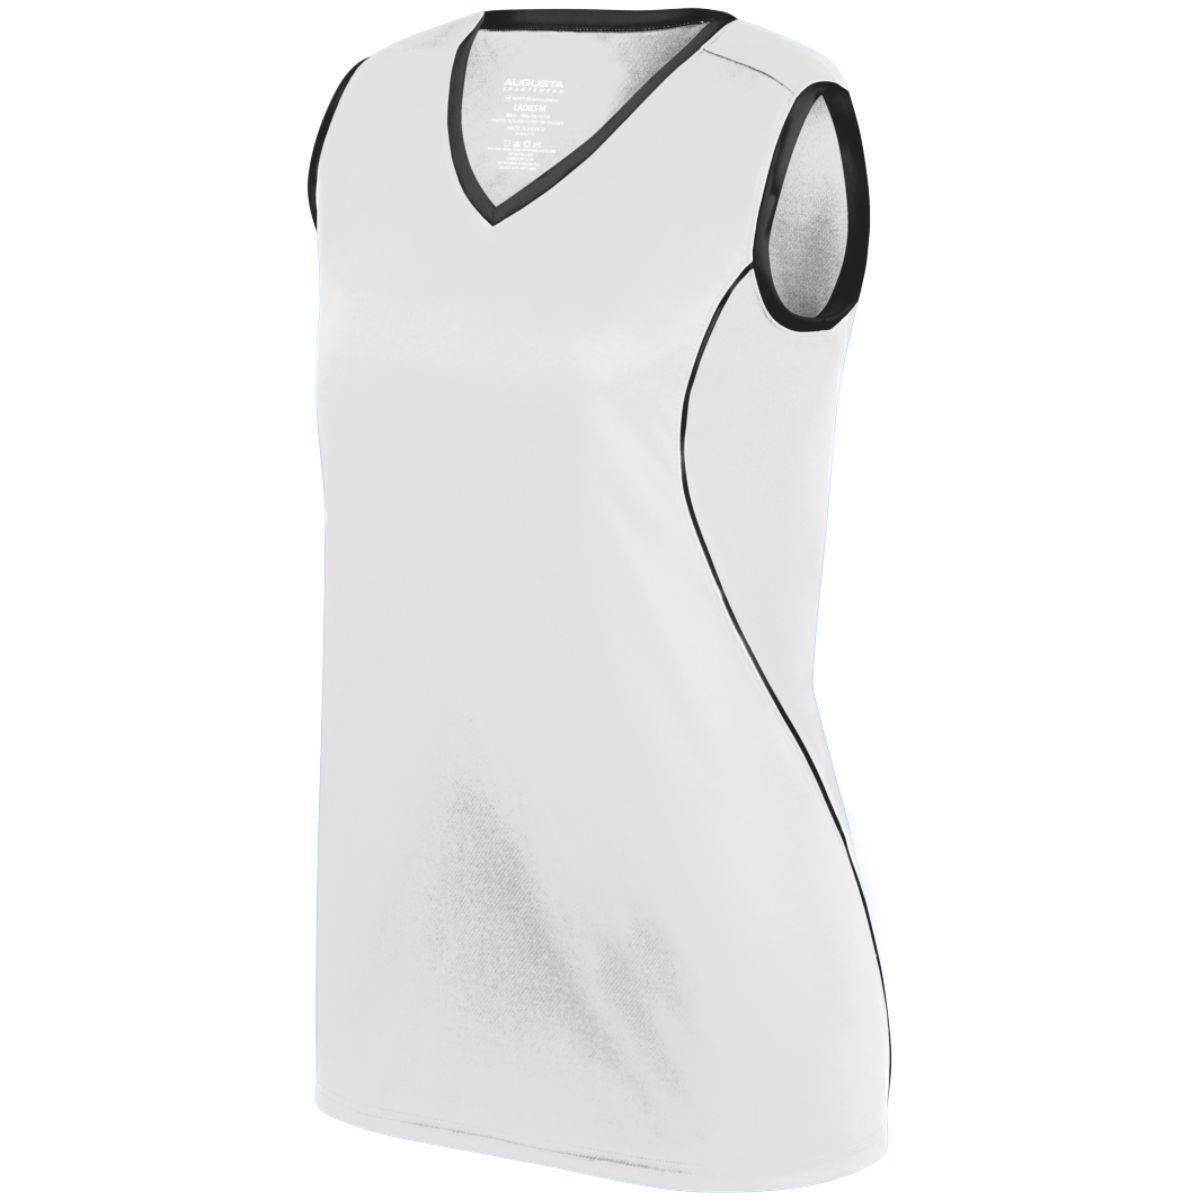 Augusta Sportswear Girls Firebolt Jersey in White/Black  -Part of the Girls, Augusta-Products, Softball, Girls-Jersey, Shirts product lines at KanaleyCreations.com